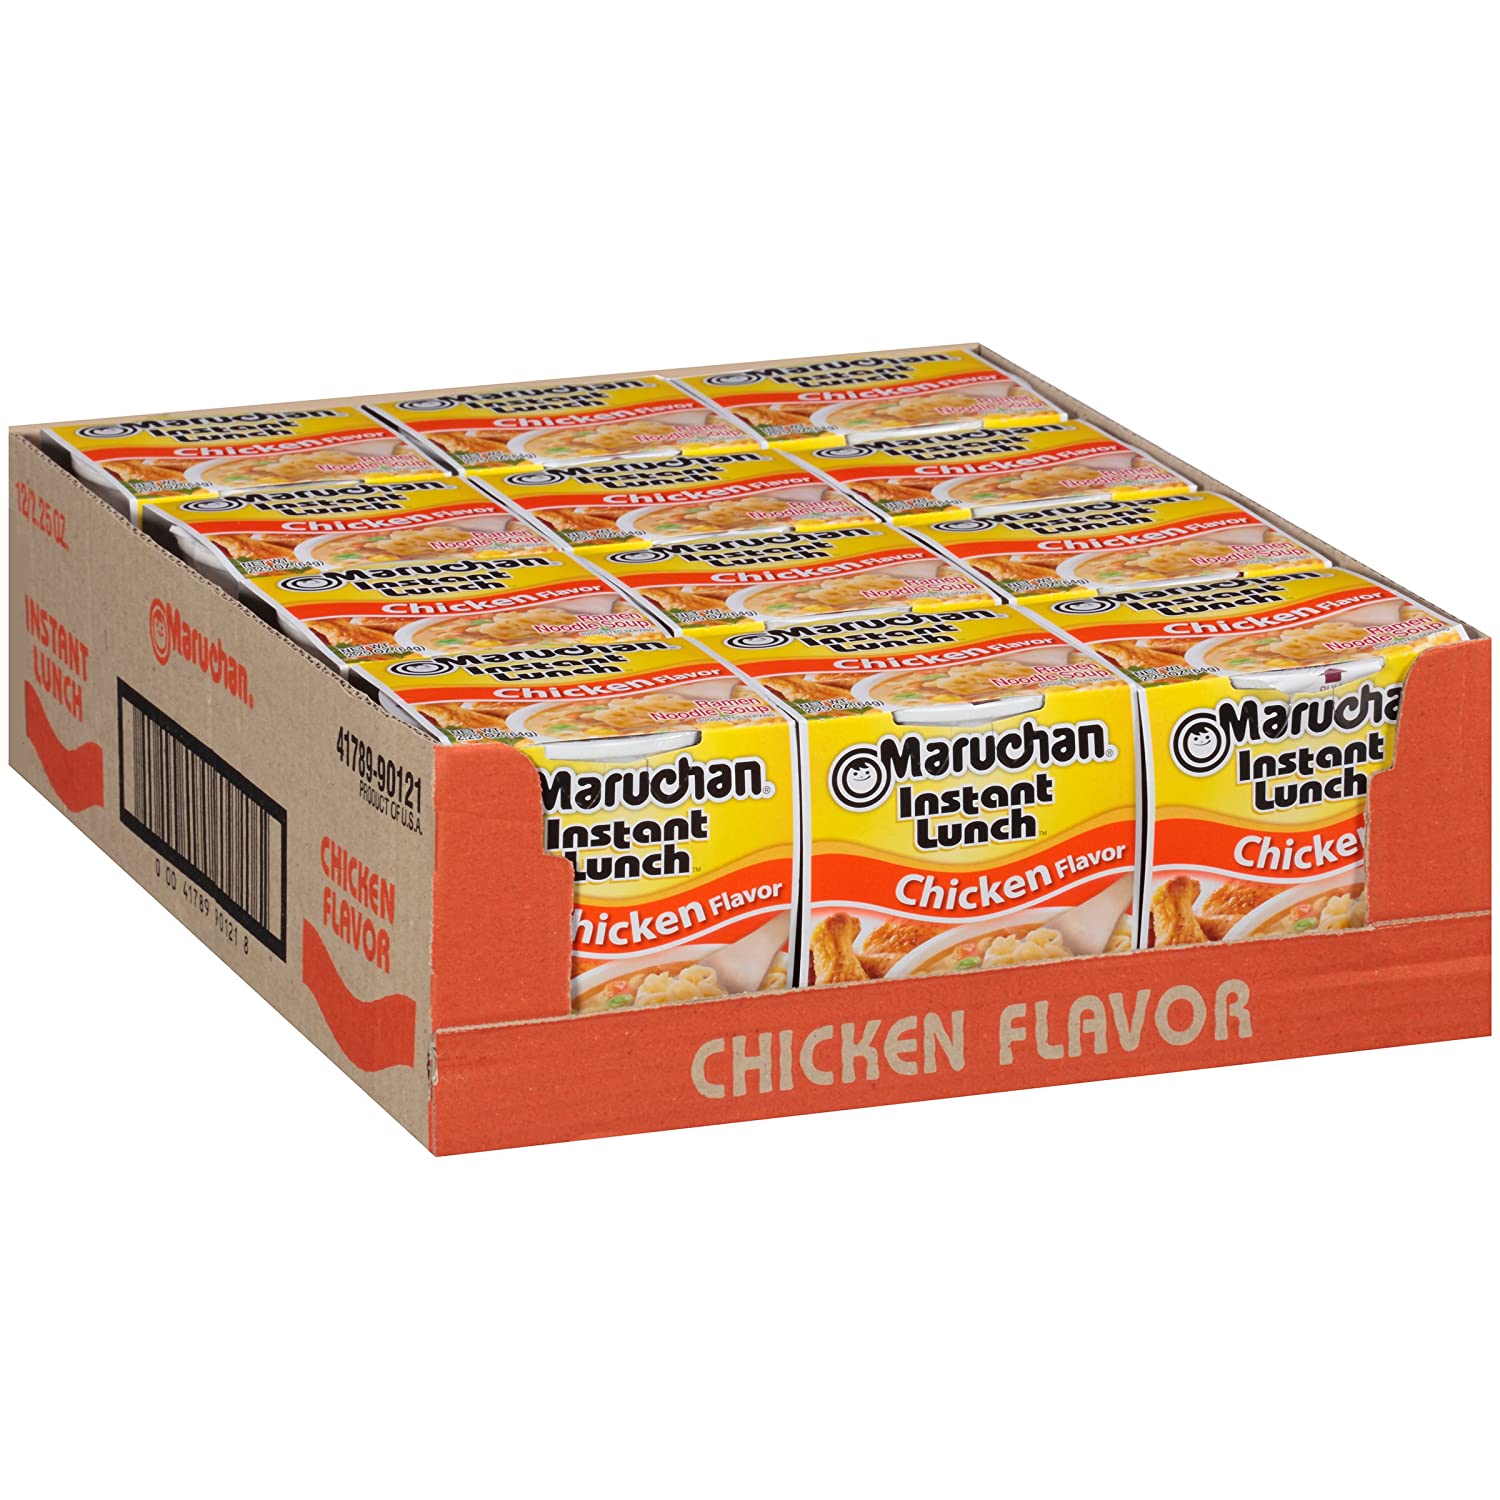 12-Pack 2.25-Oz Maruchan Instant Lunch (Chicken) $4.44 + Free Shipping w/ Prime or on orders over $25